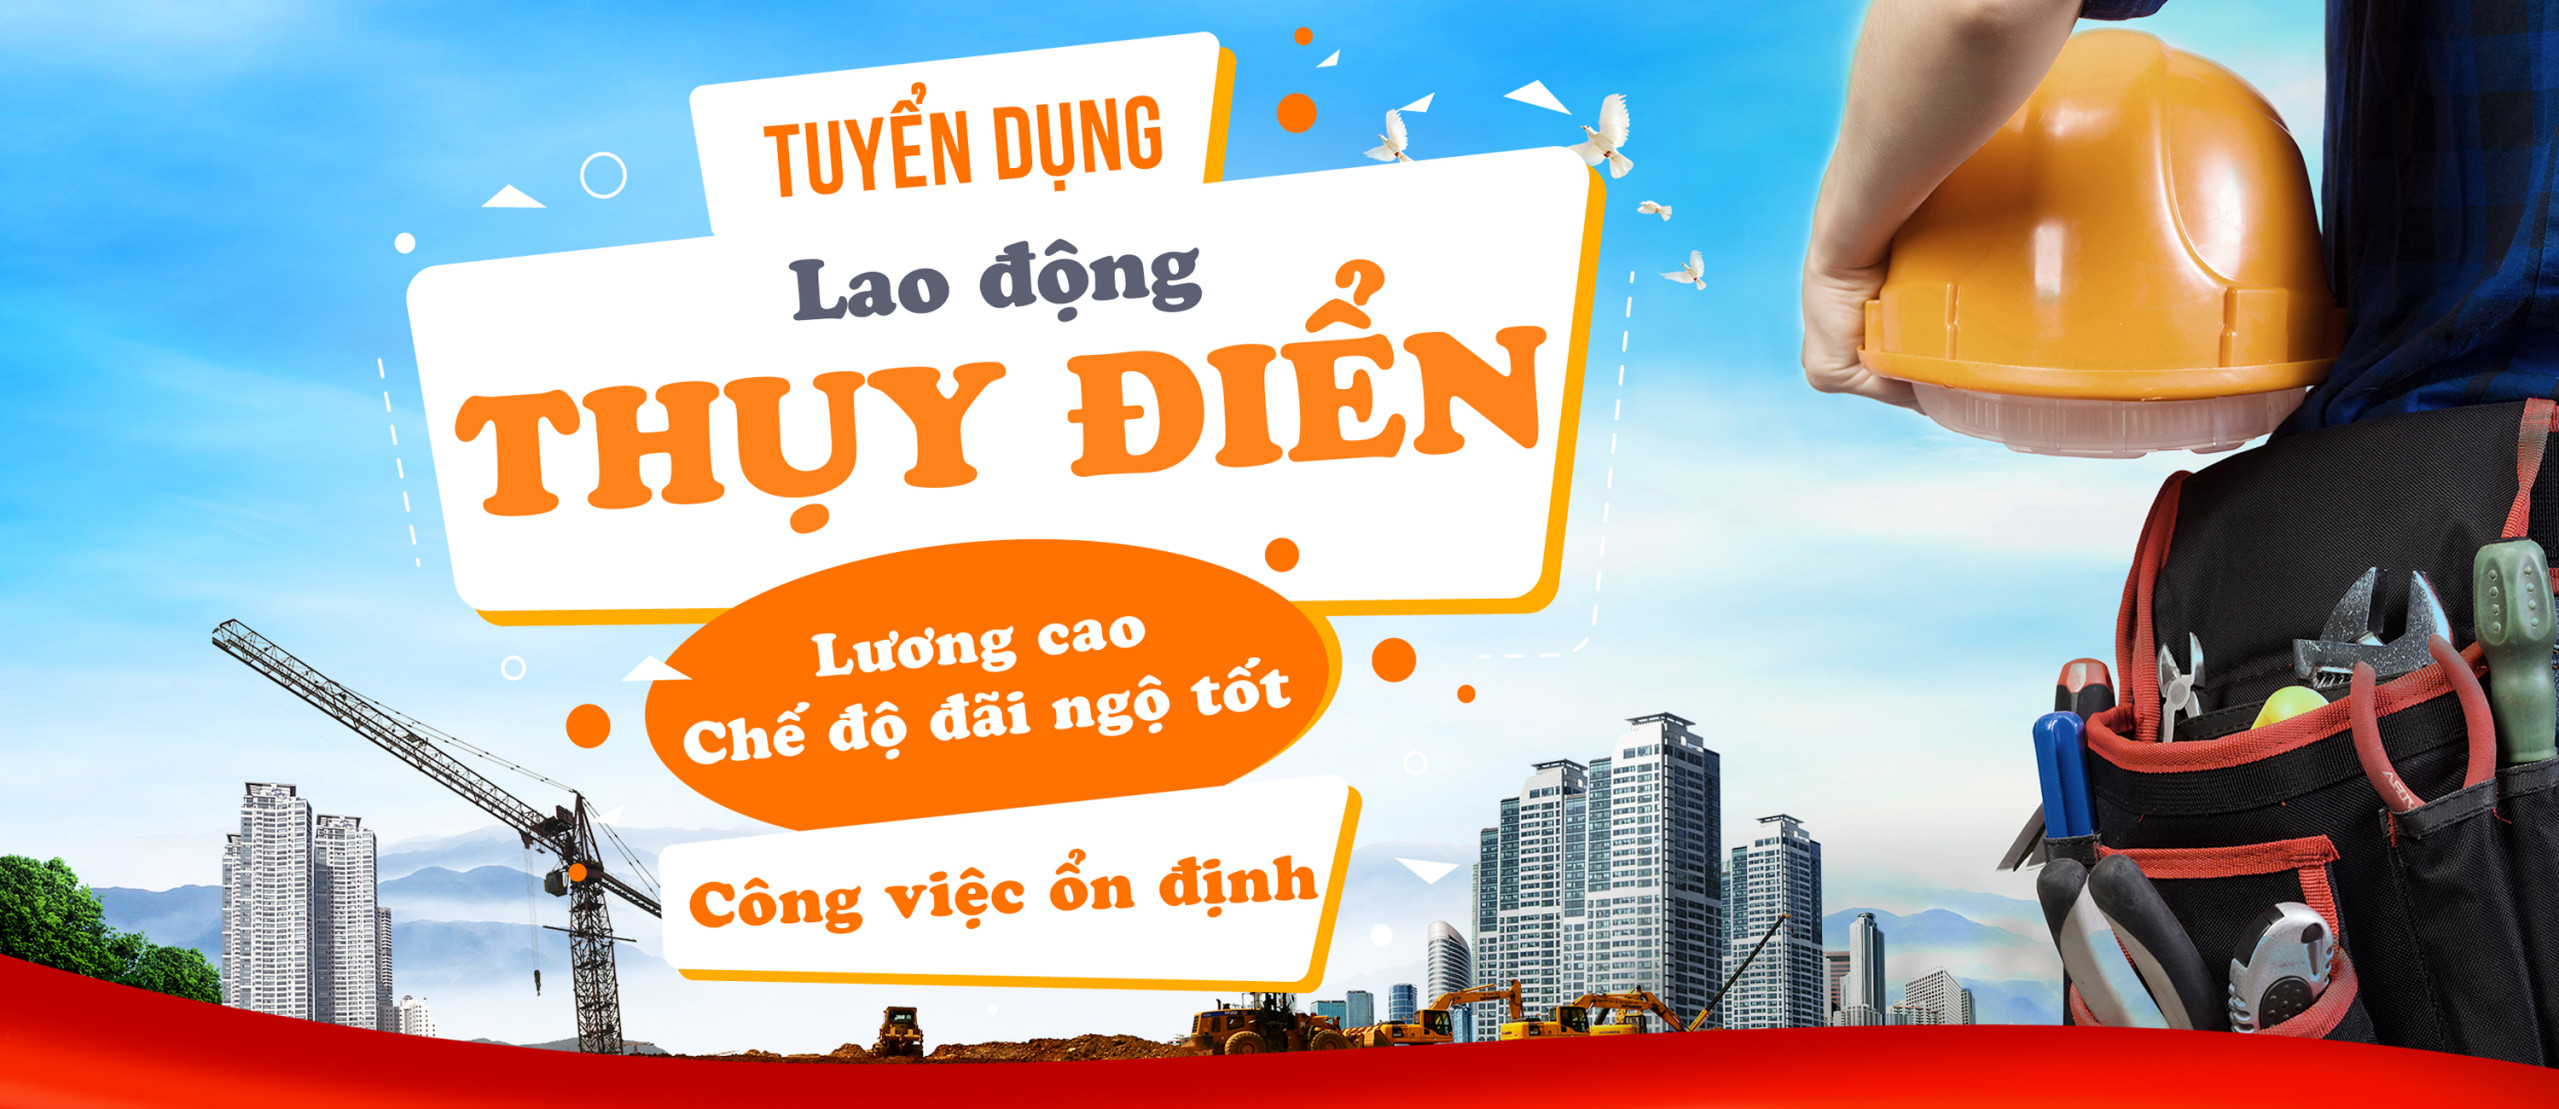 tuyen-dung-lao-dong-thuy-dien